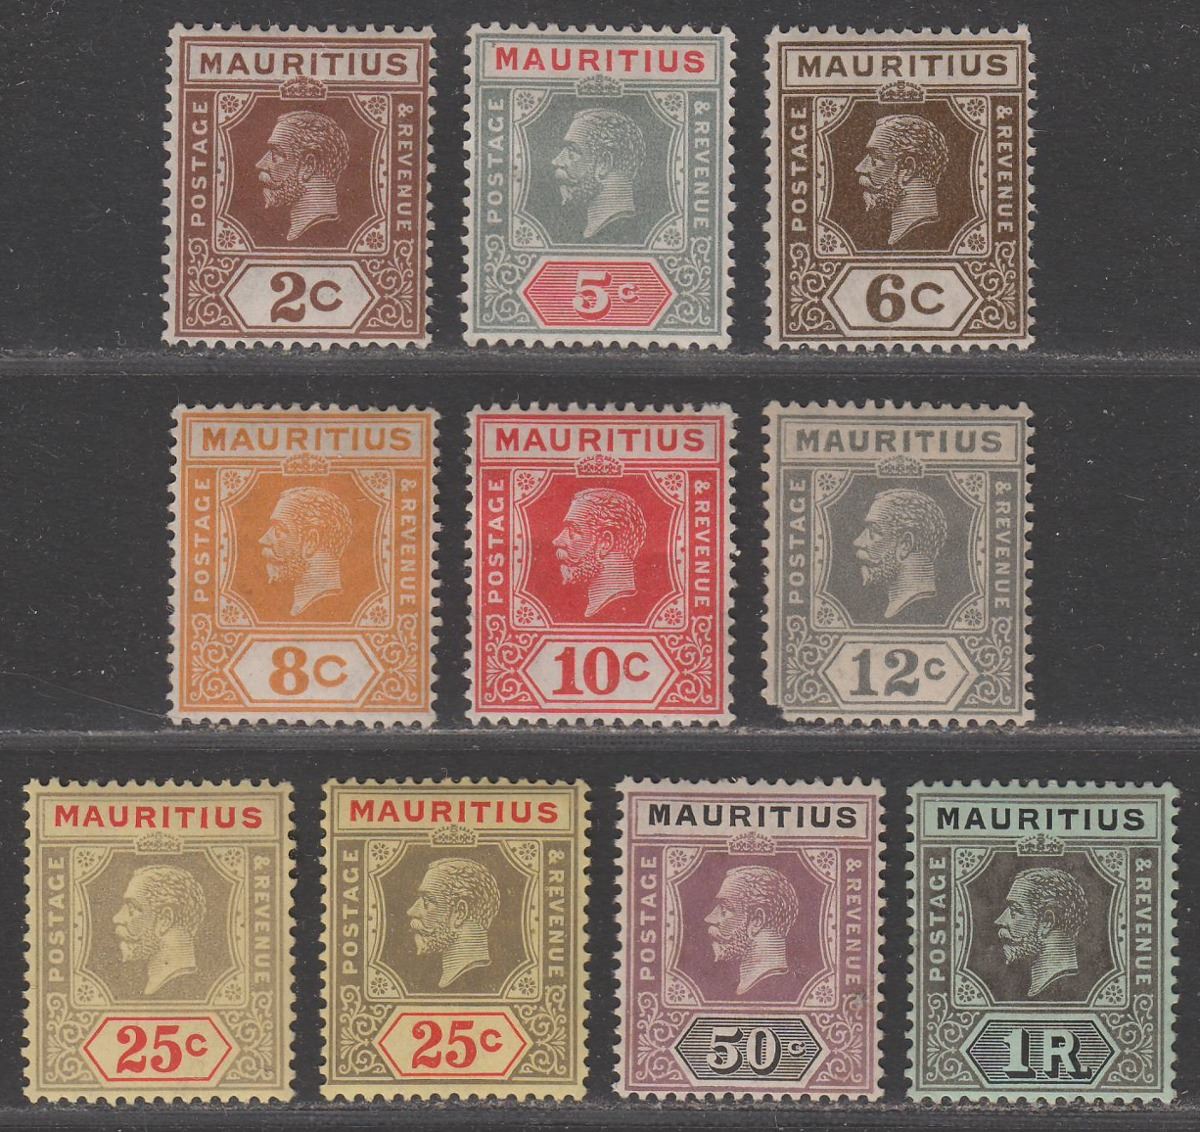 Mauritius 1921-34 King George V Part Set to 50c Mint + earlier 50c